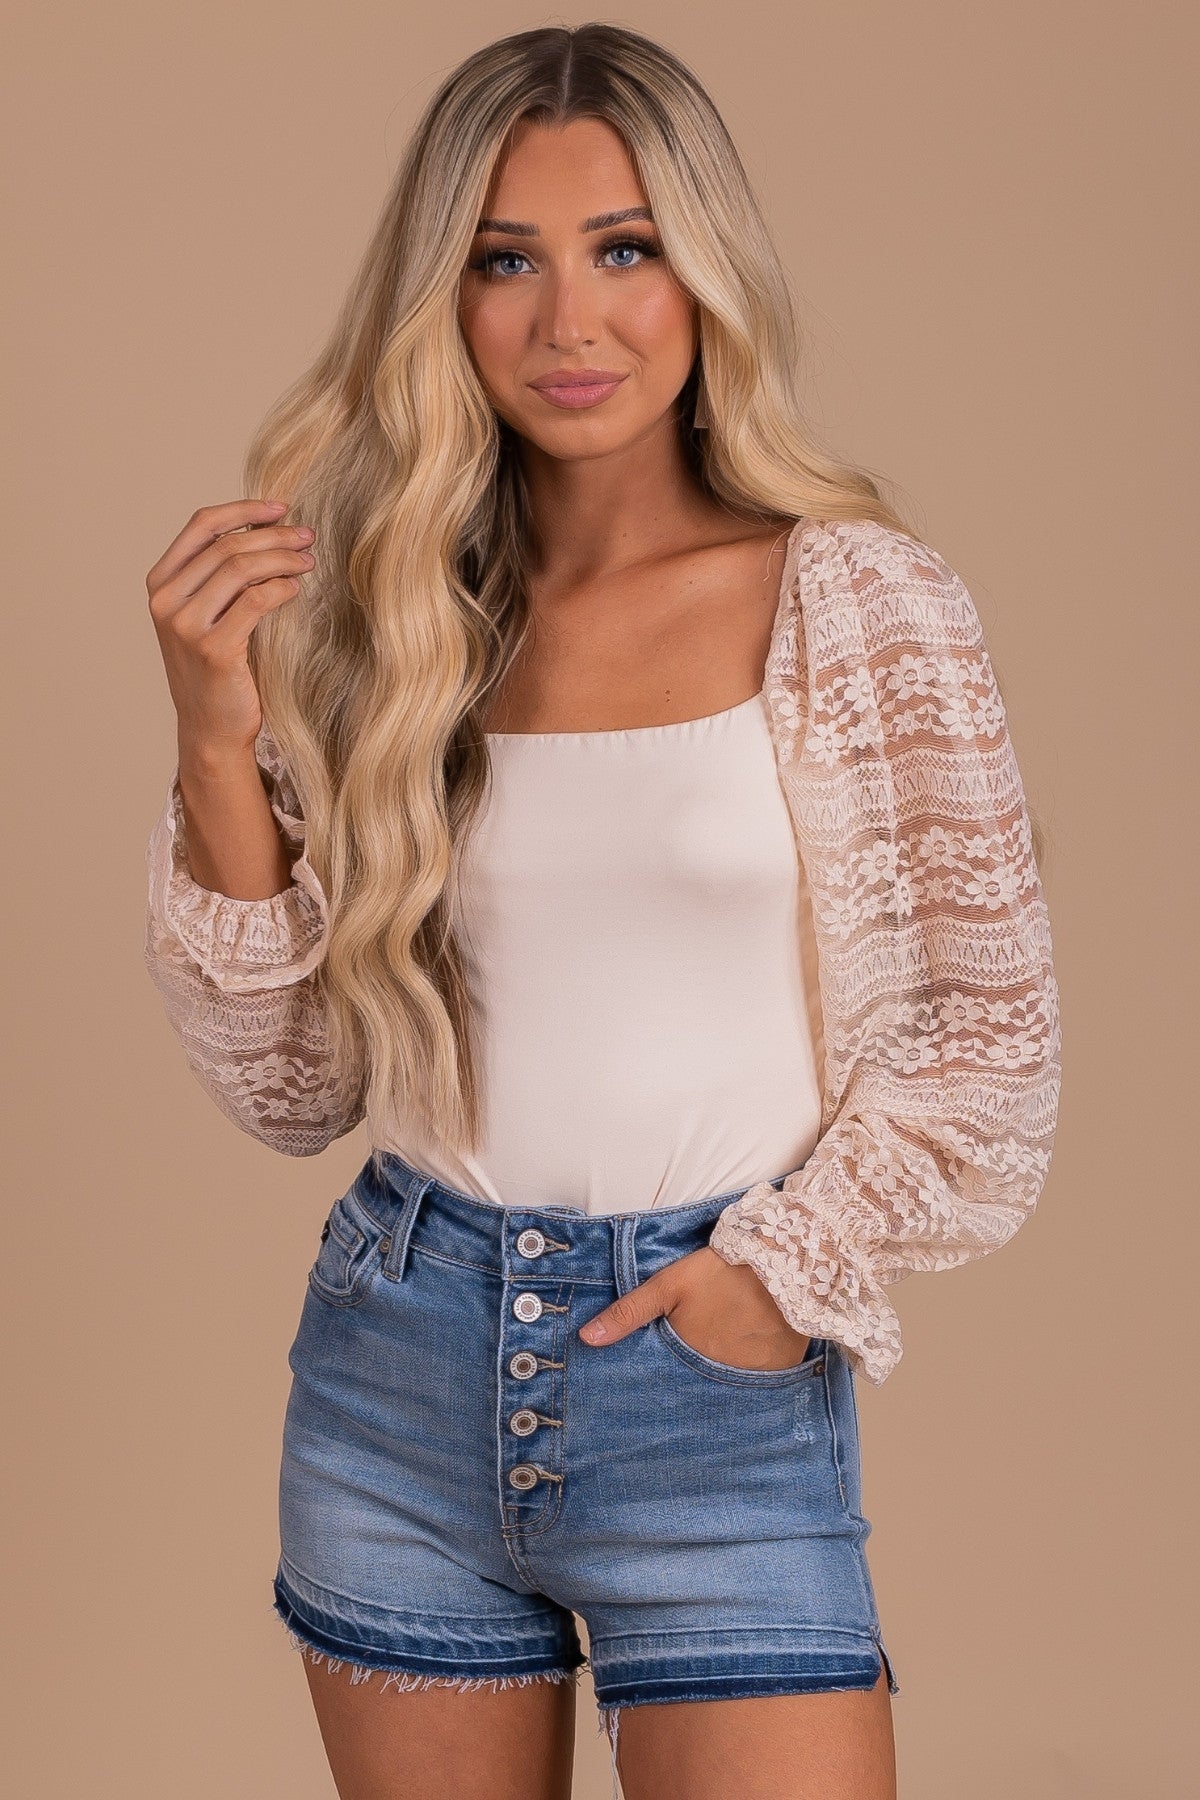 Bodysuit in Cream with Lace Long Sleeves and Square Neck